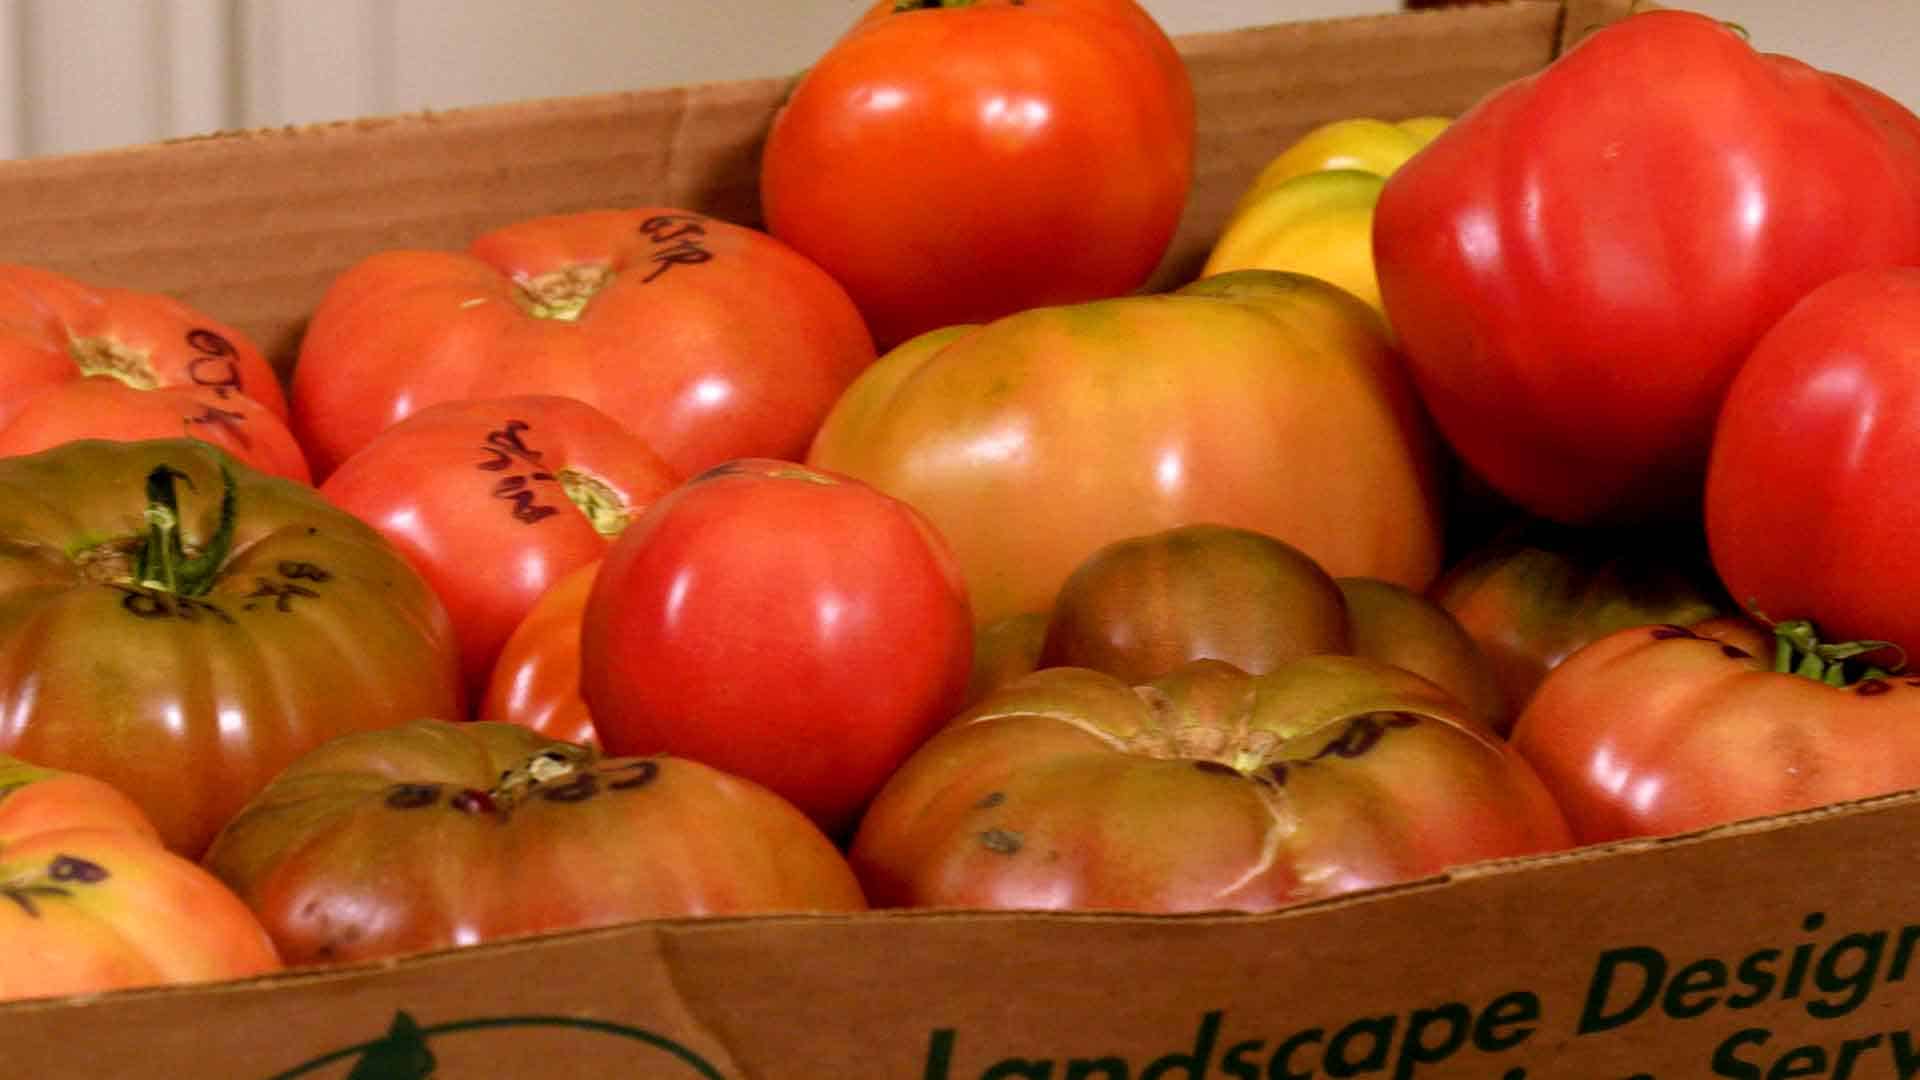 Heirloom tomatoes in a box.